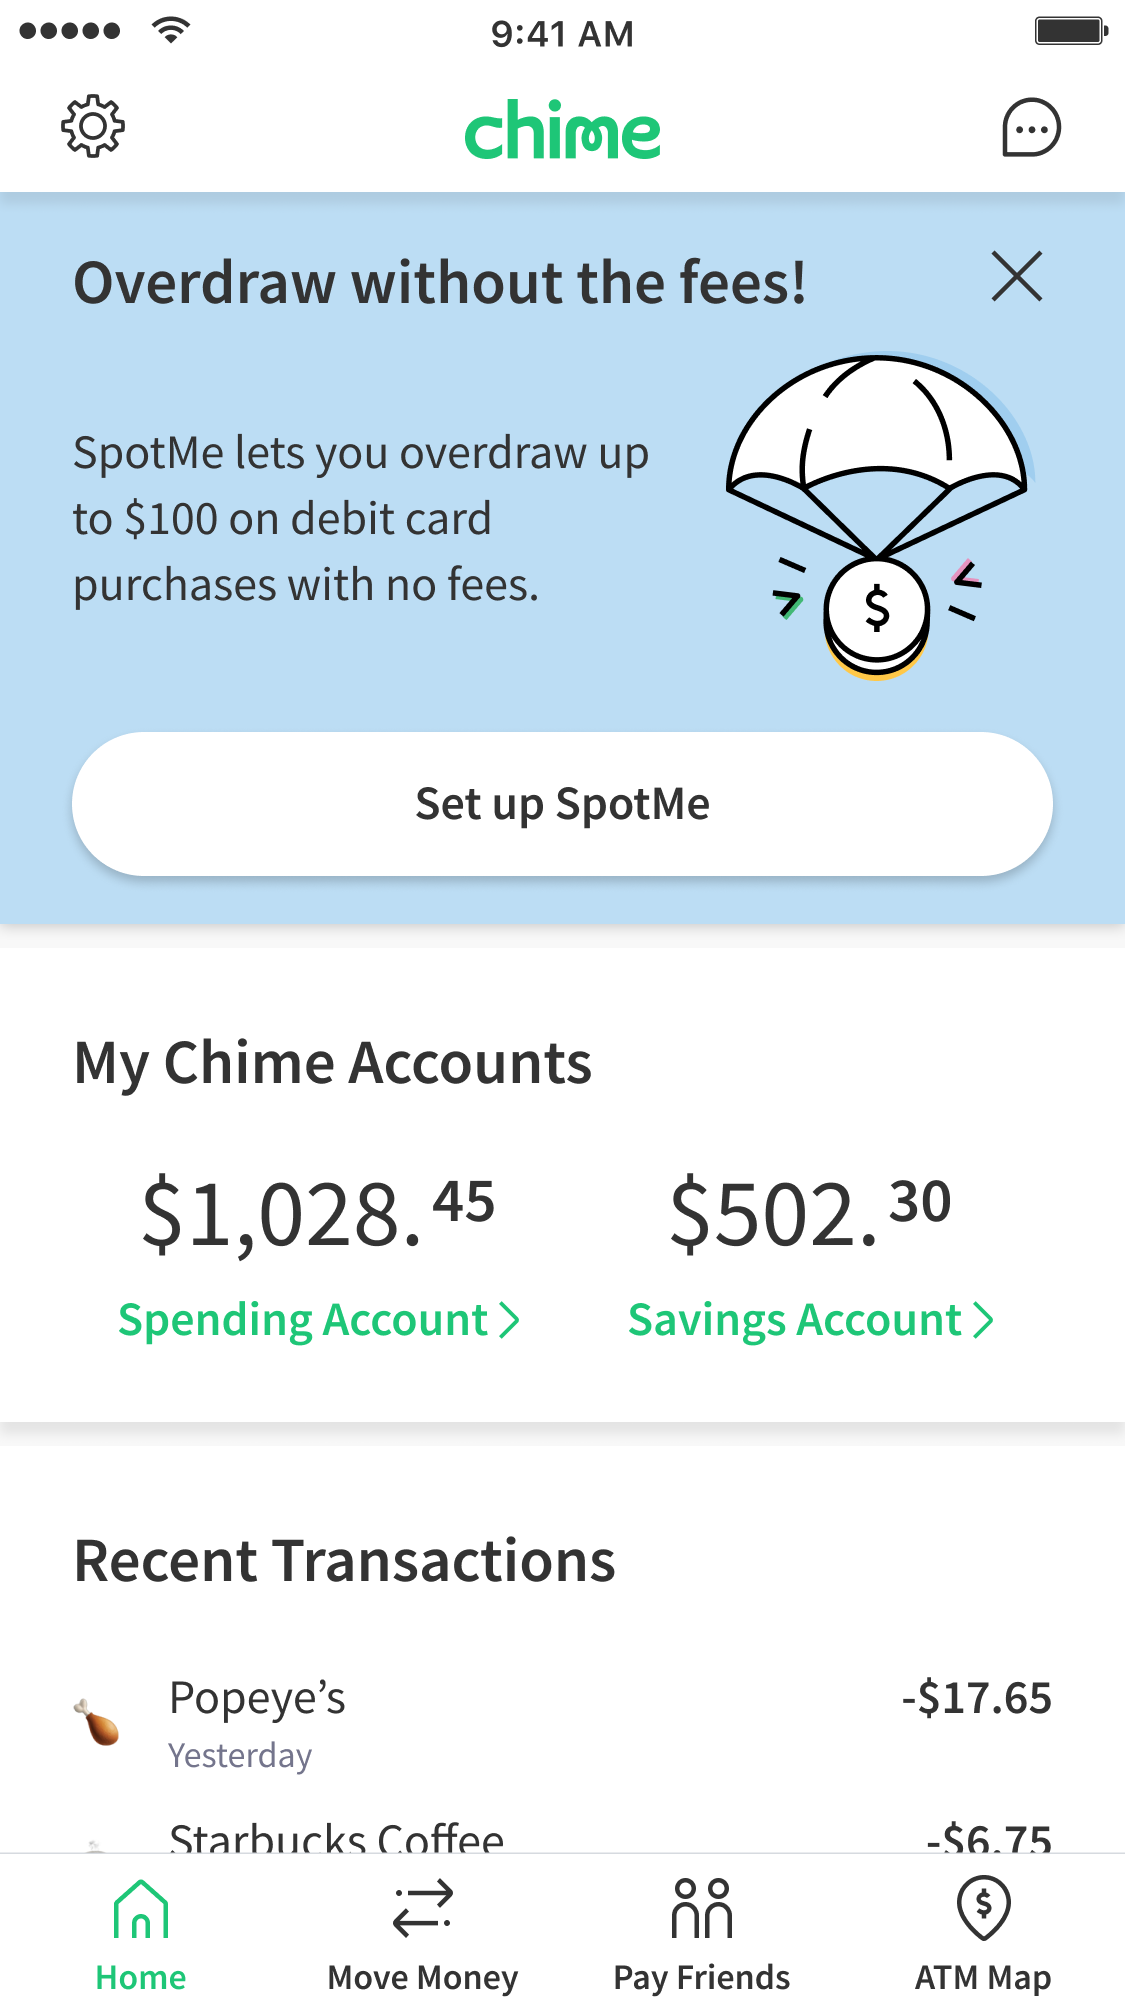 Chime Now Has 5 Million Customers And Introduces Overdraft